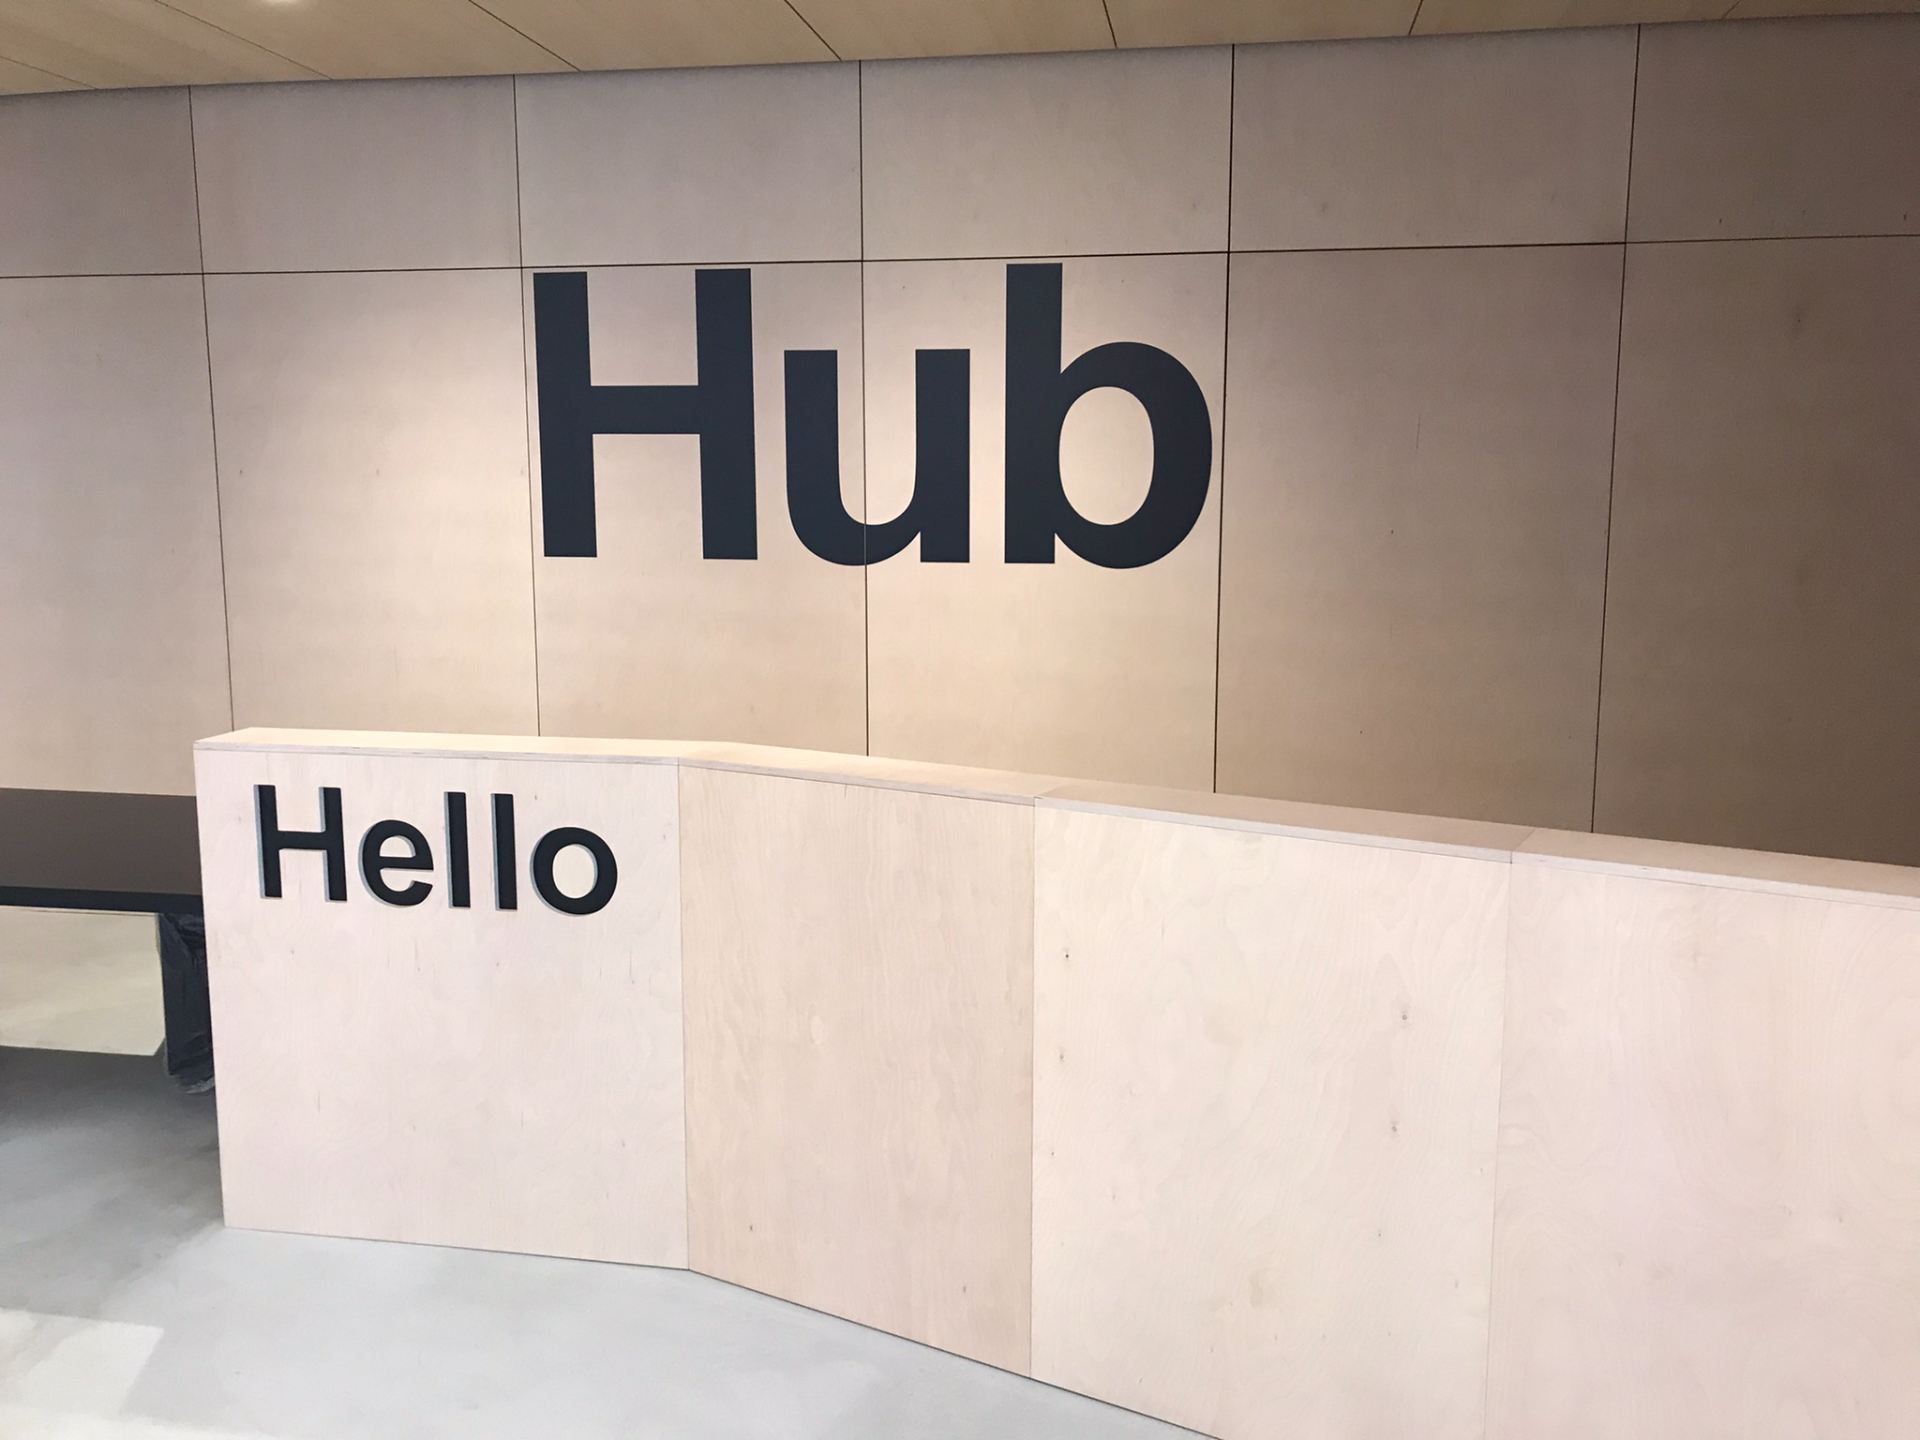 Wooden helpdesk with "Hello" carved in the front of the desk, Hub in big black letters on the wall behind the desk